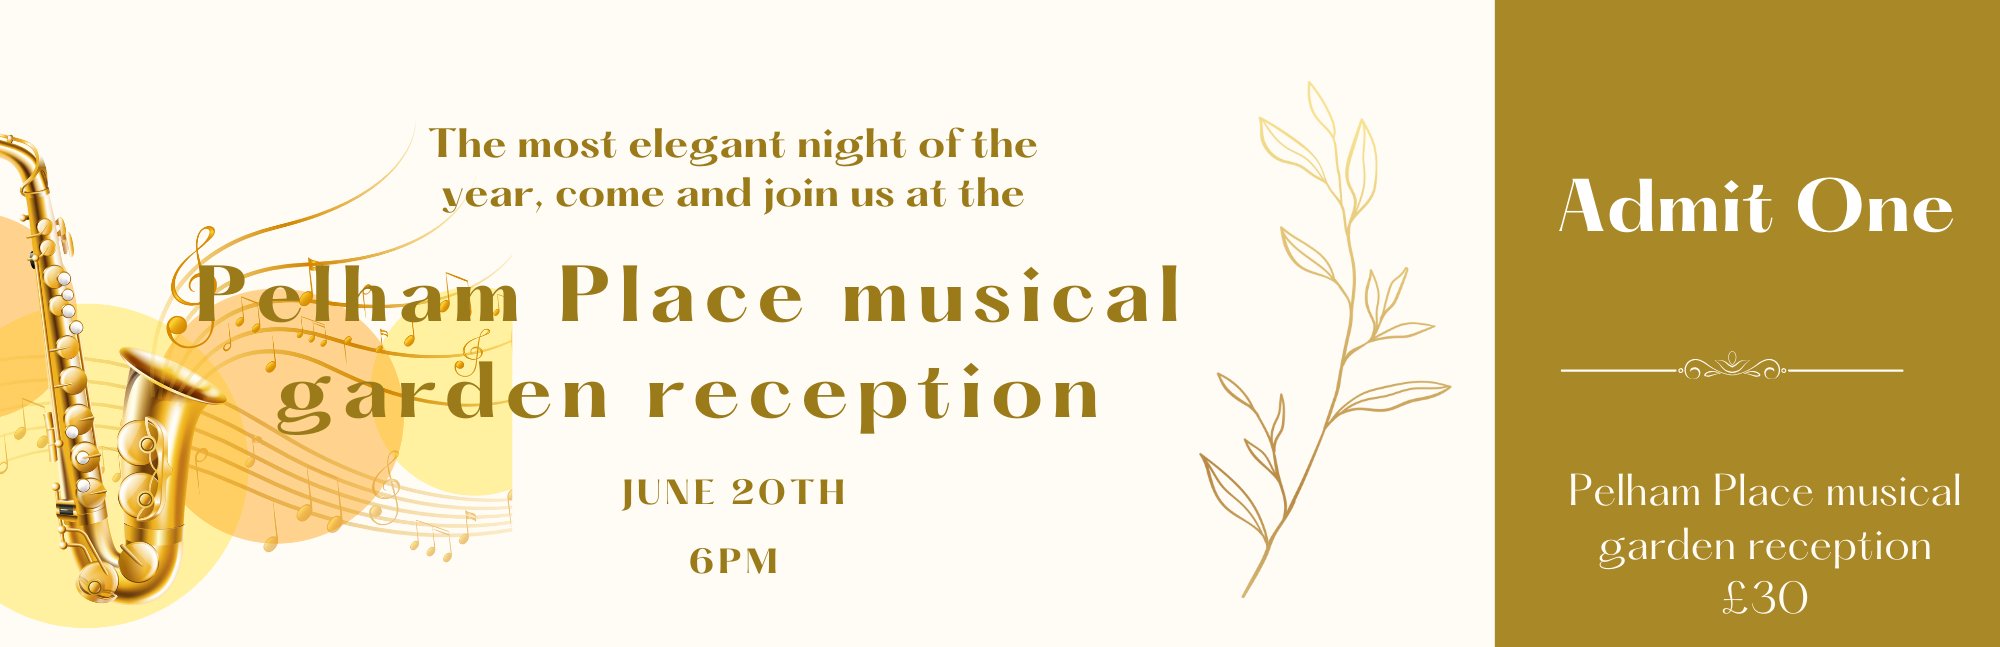 An image of Pelham Place musical garden reception – ticket and donation